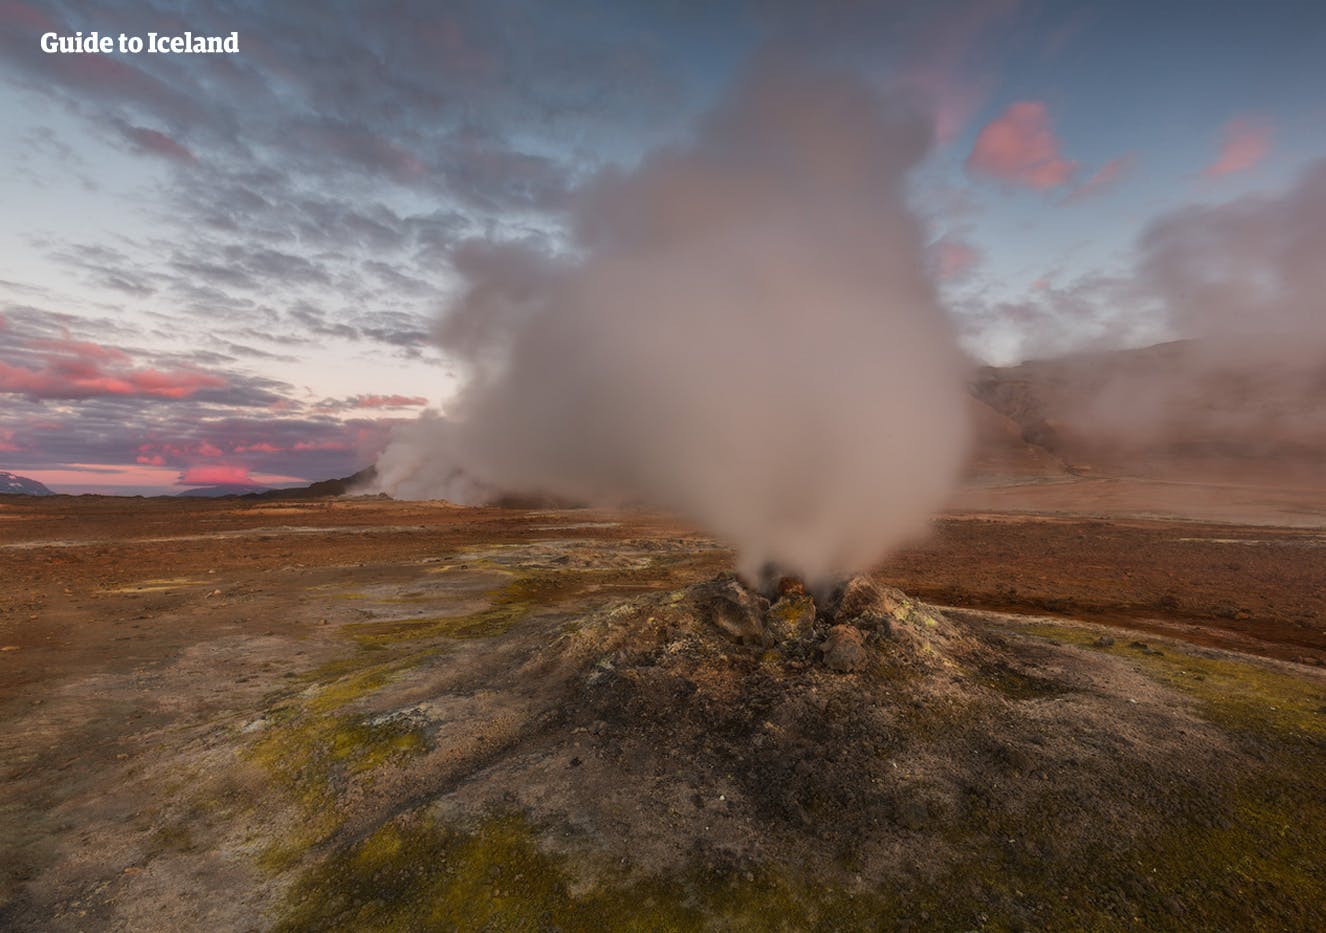 The geothermal area near Lake Mývatn is filled with bubbling mud pools and fumaroles